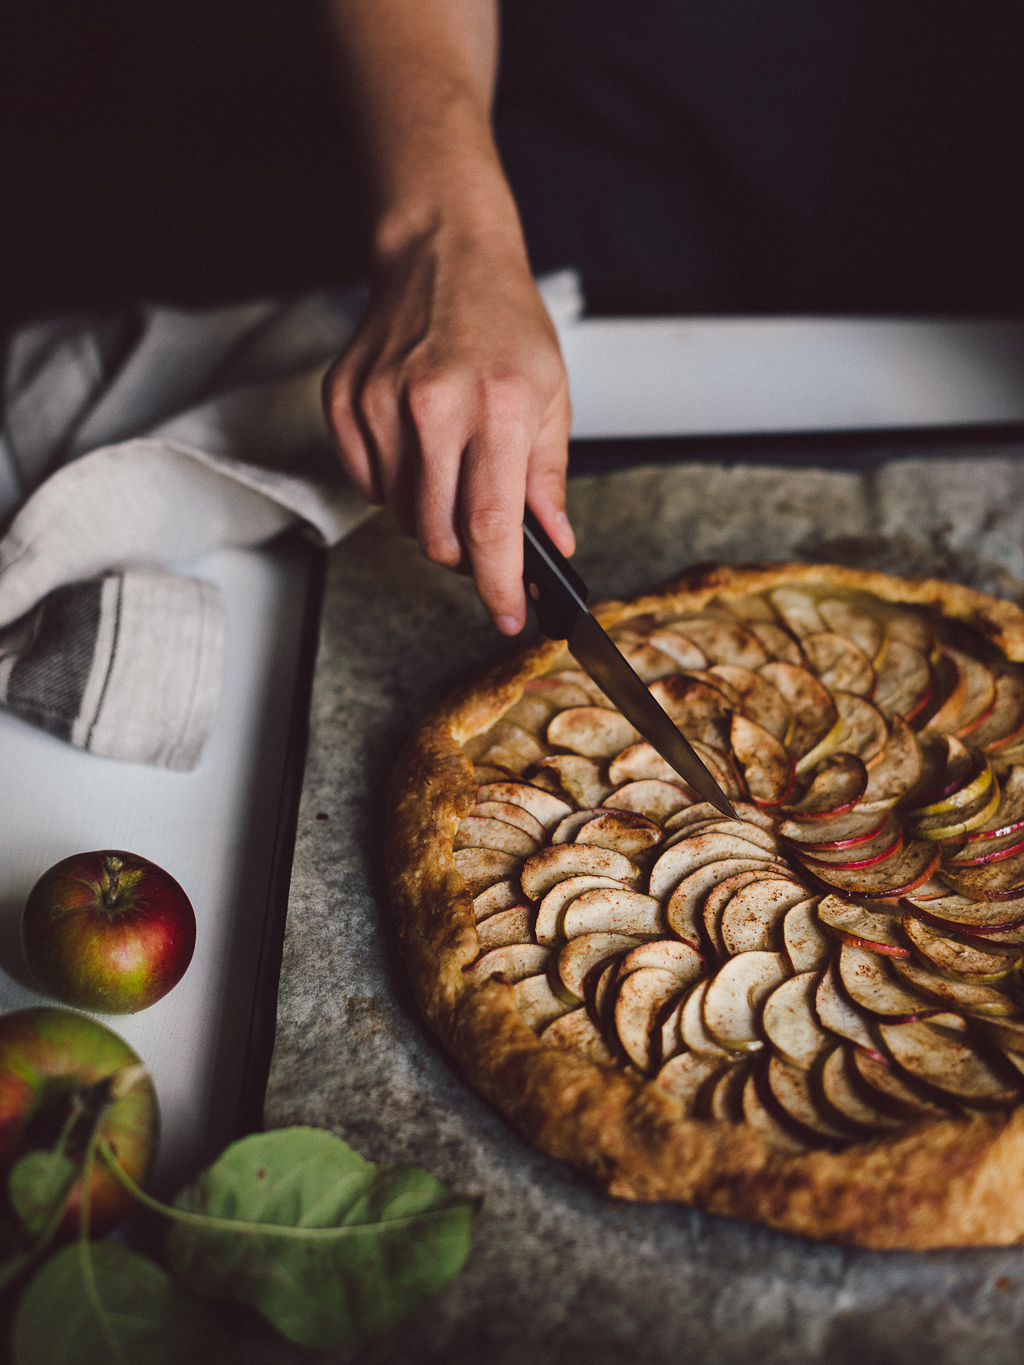 Apple galette by Babes in Boyland